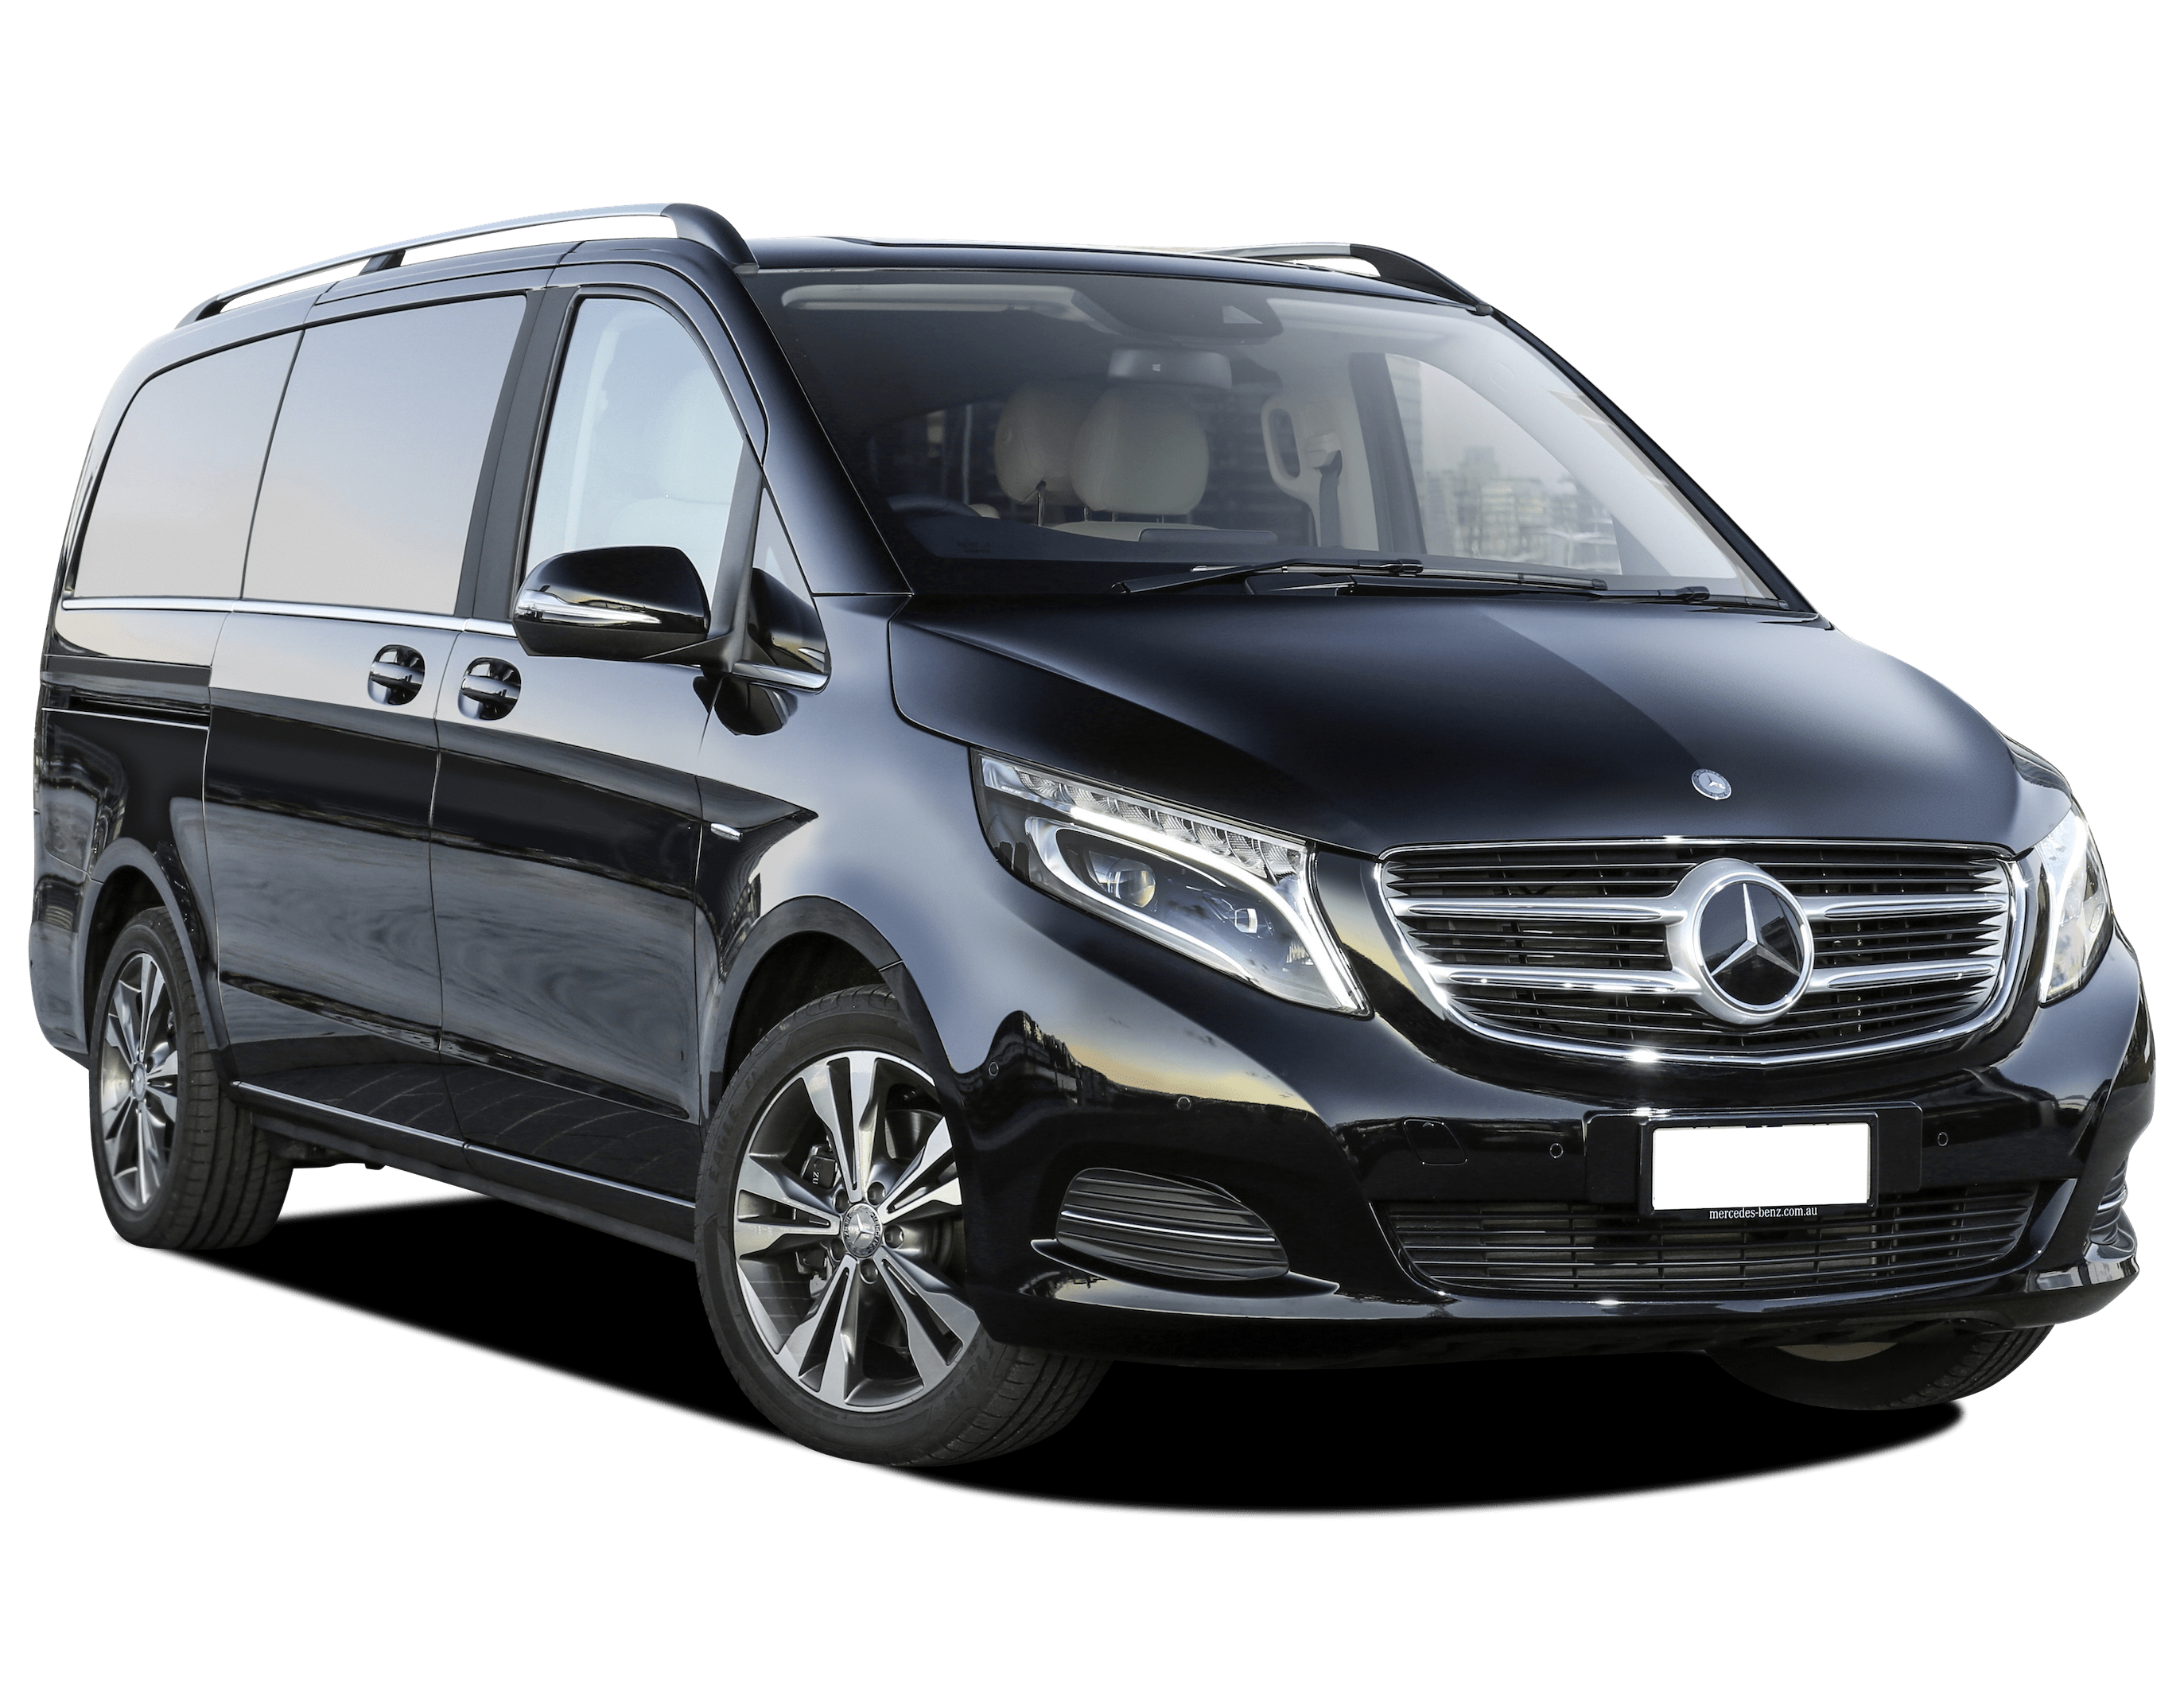 Mercedes V-Class Review, For Sale, Specs, Models & News in Australia